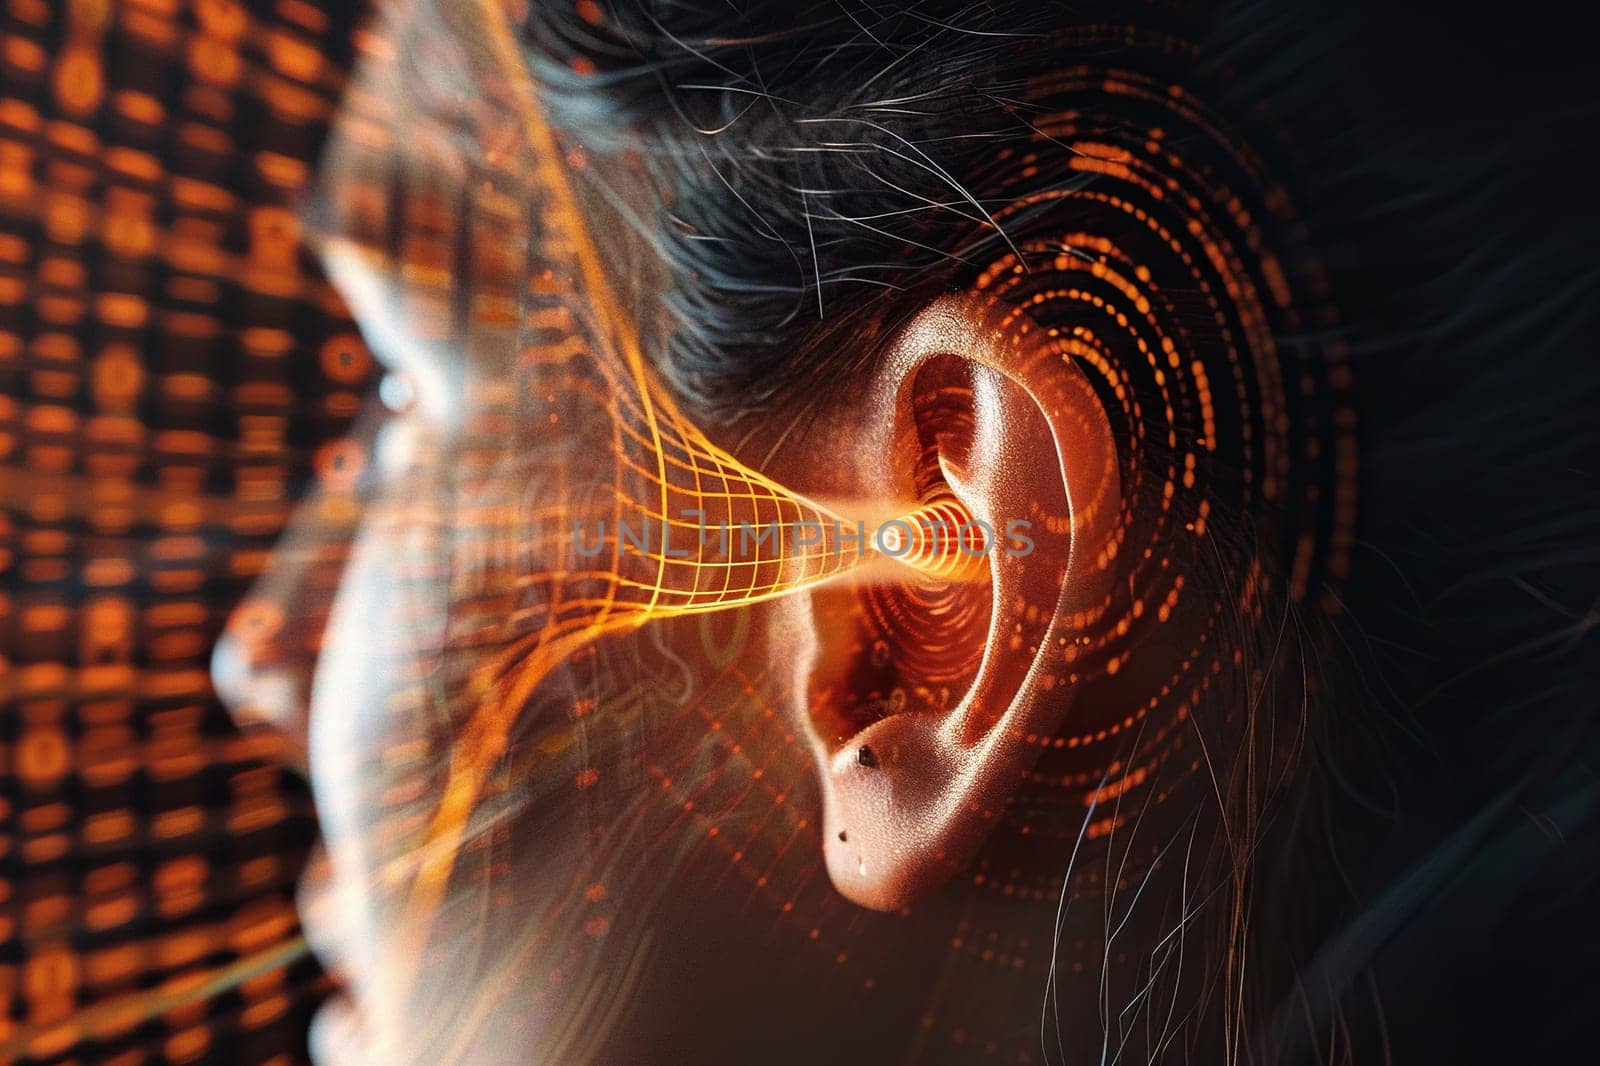 Abstract image of electromagnetic and sound waves near a woman's ear.